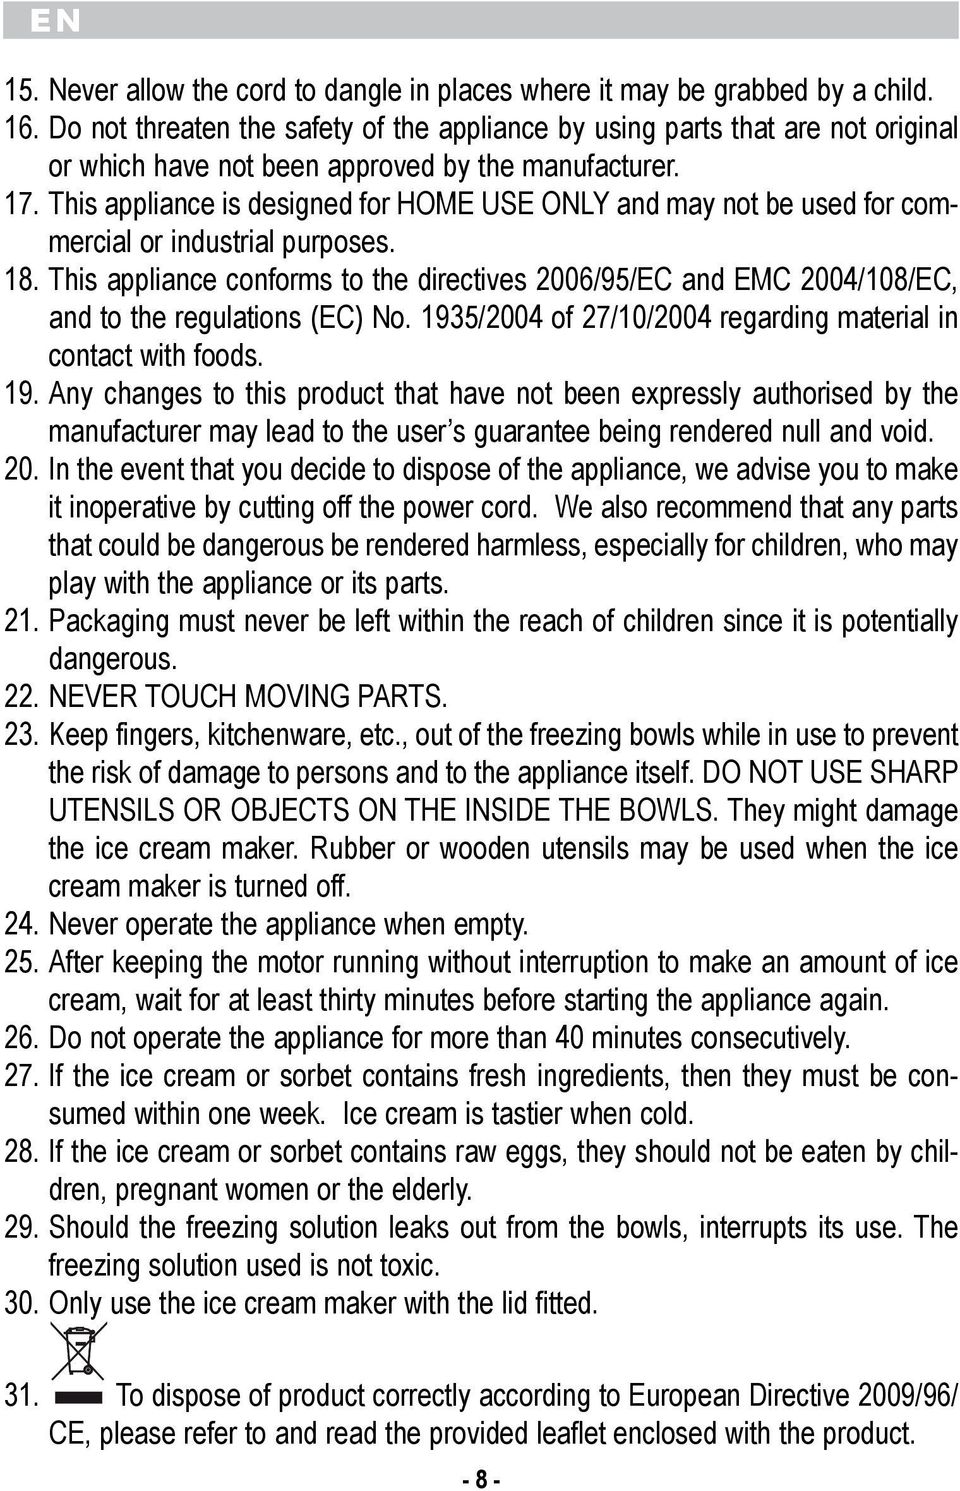 2004/108/EC, and to the regulations (EC) No 1935/2004 of 27/10/2004 regarding material in contact with foods 19 Any changes to this product that have not been expressly authorised by the manufacturer